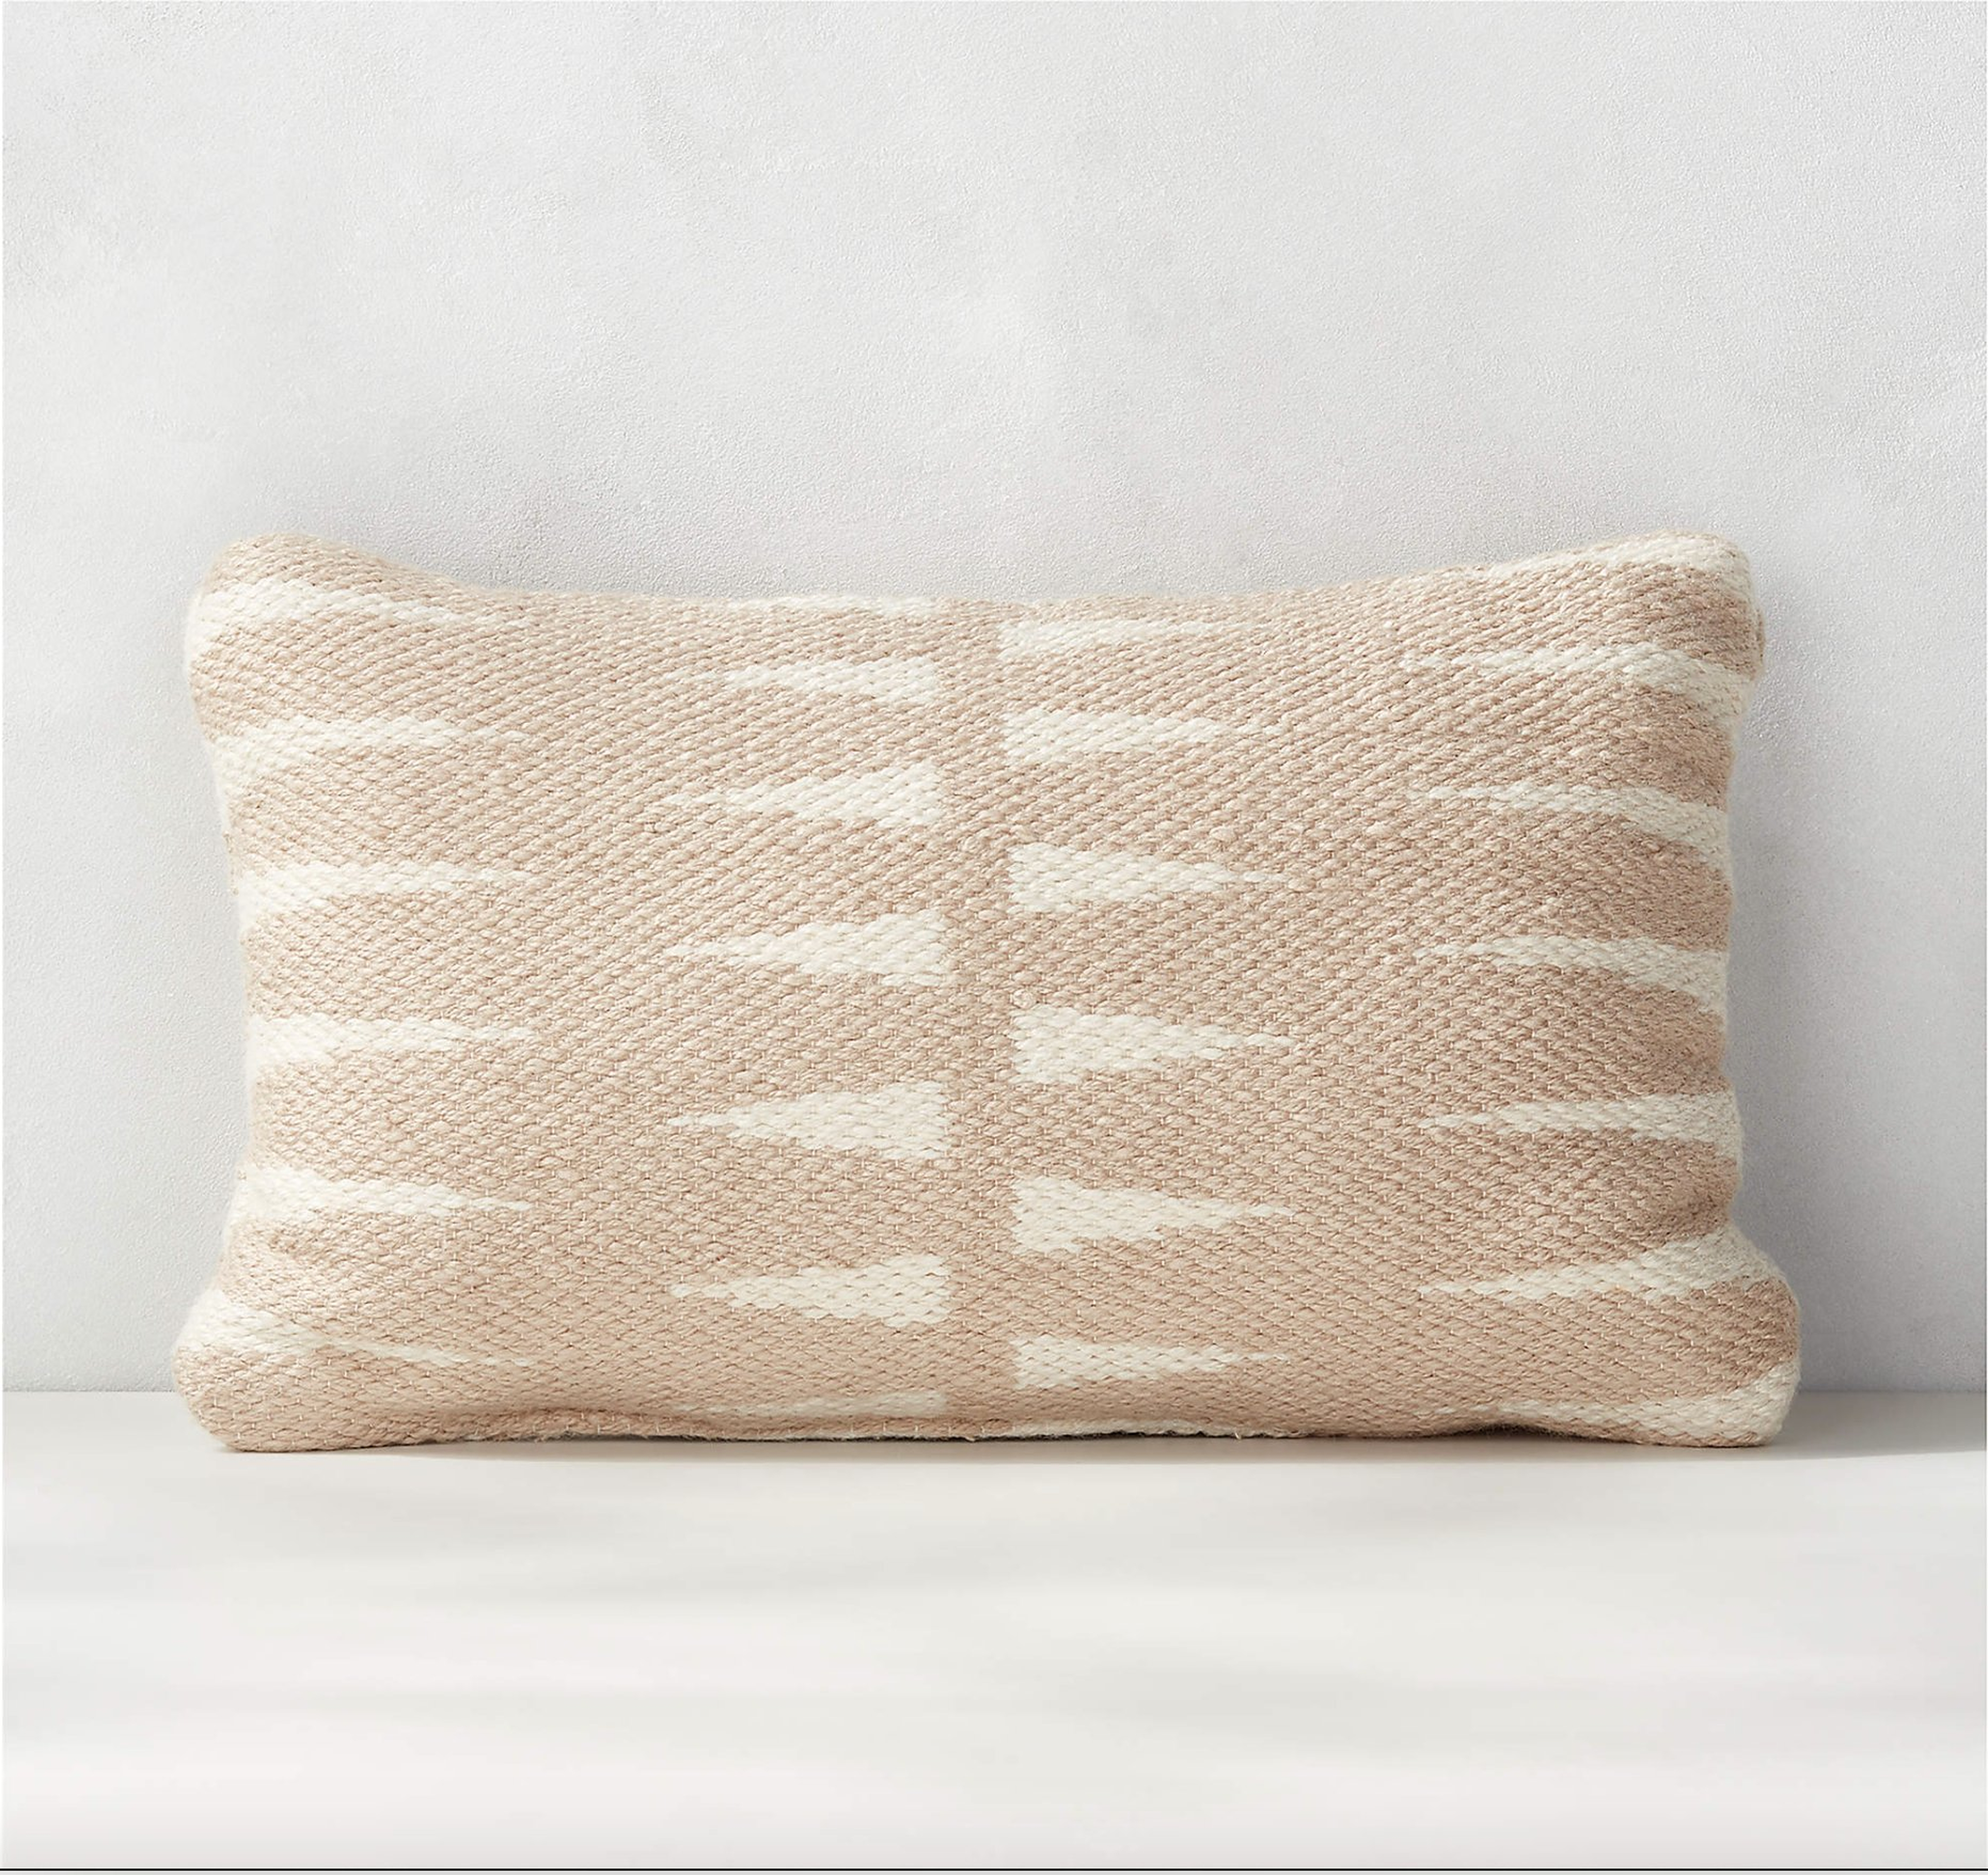 20"X12" SHIA NATURAL AND WHITE OUTDOOR PILLOW - CB2